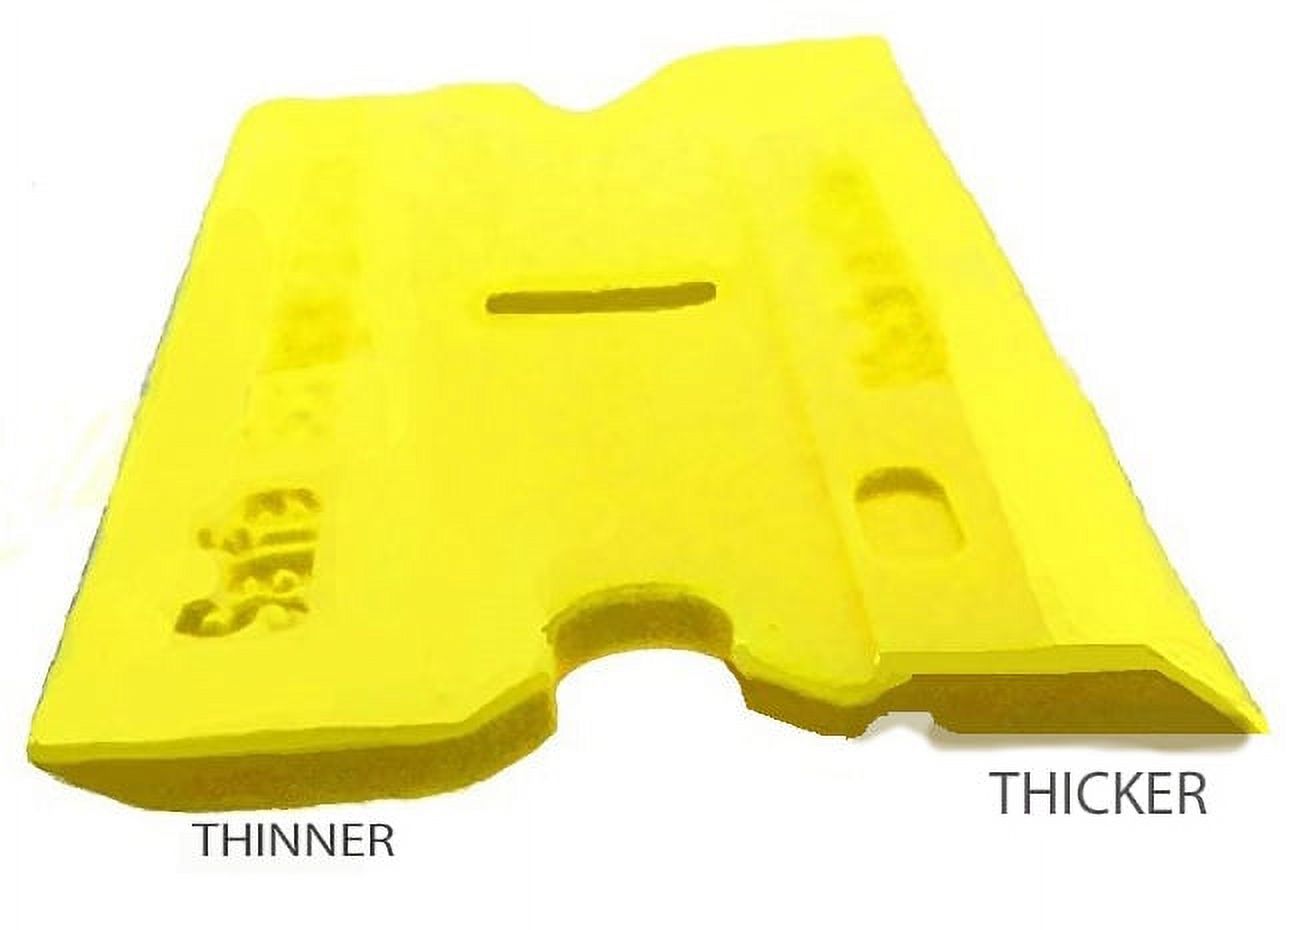 Heavy Duty Plastic Razor Blade Set with Scraper for Stickers Decals Paint Labels Scraper Removal Tool - image 5 of 5